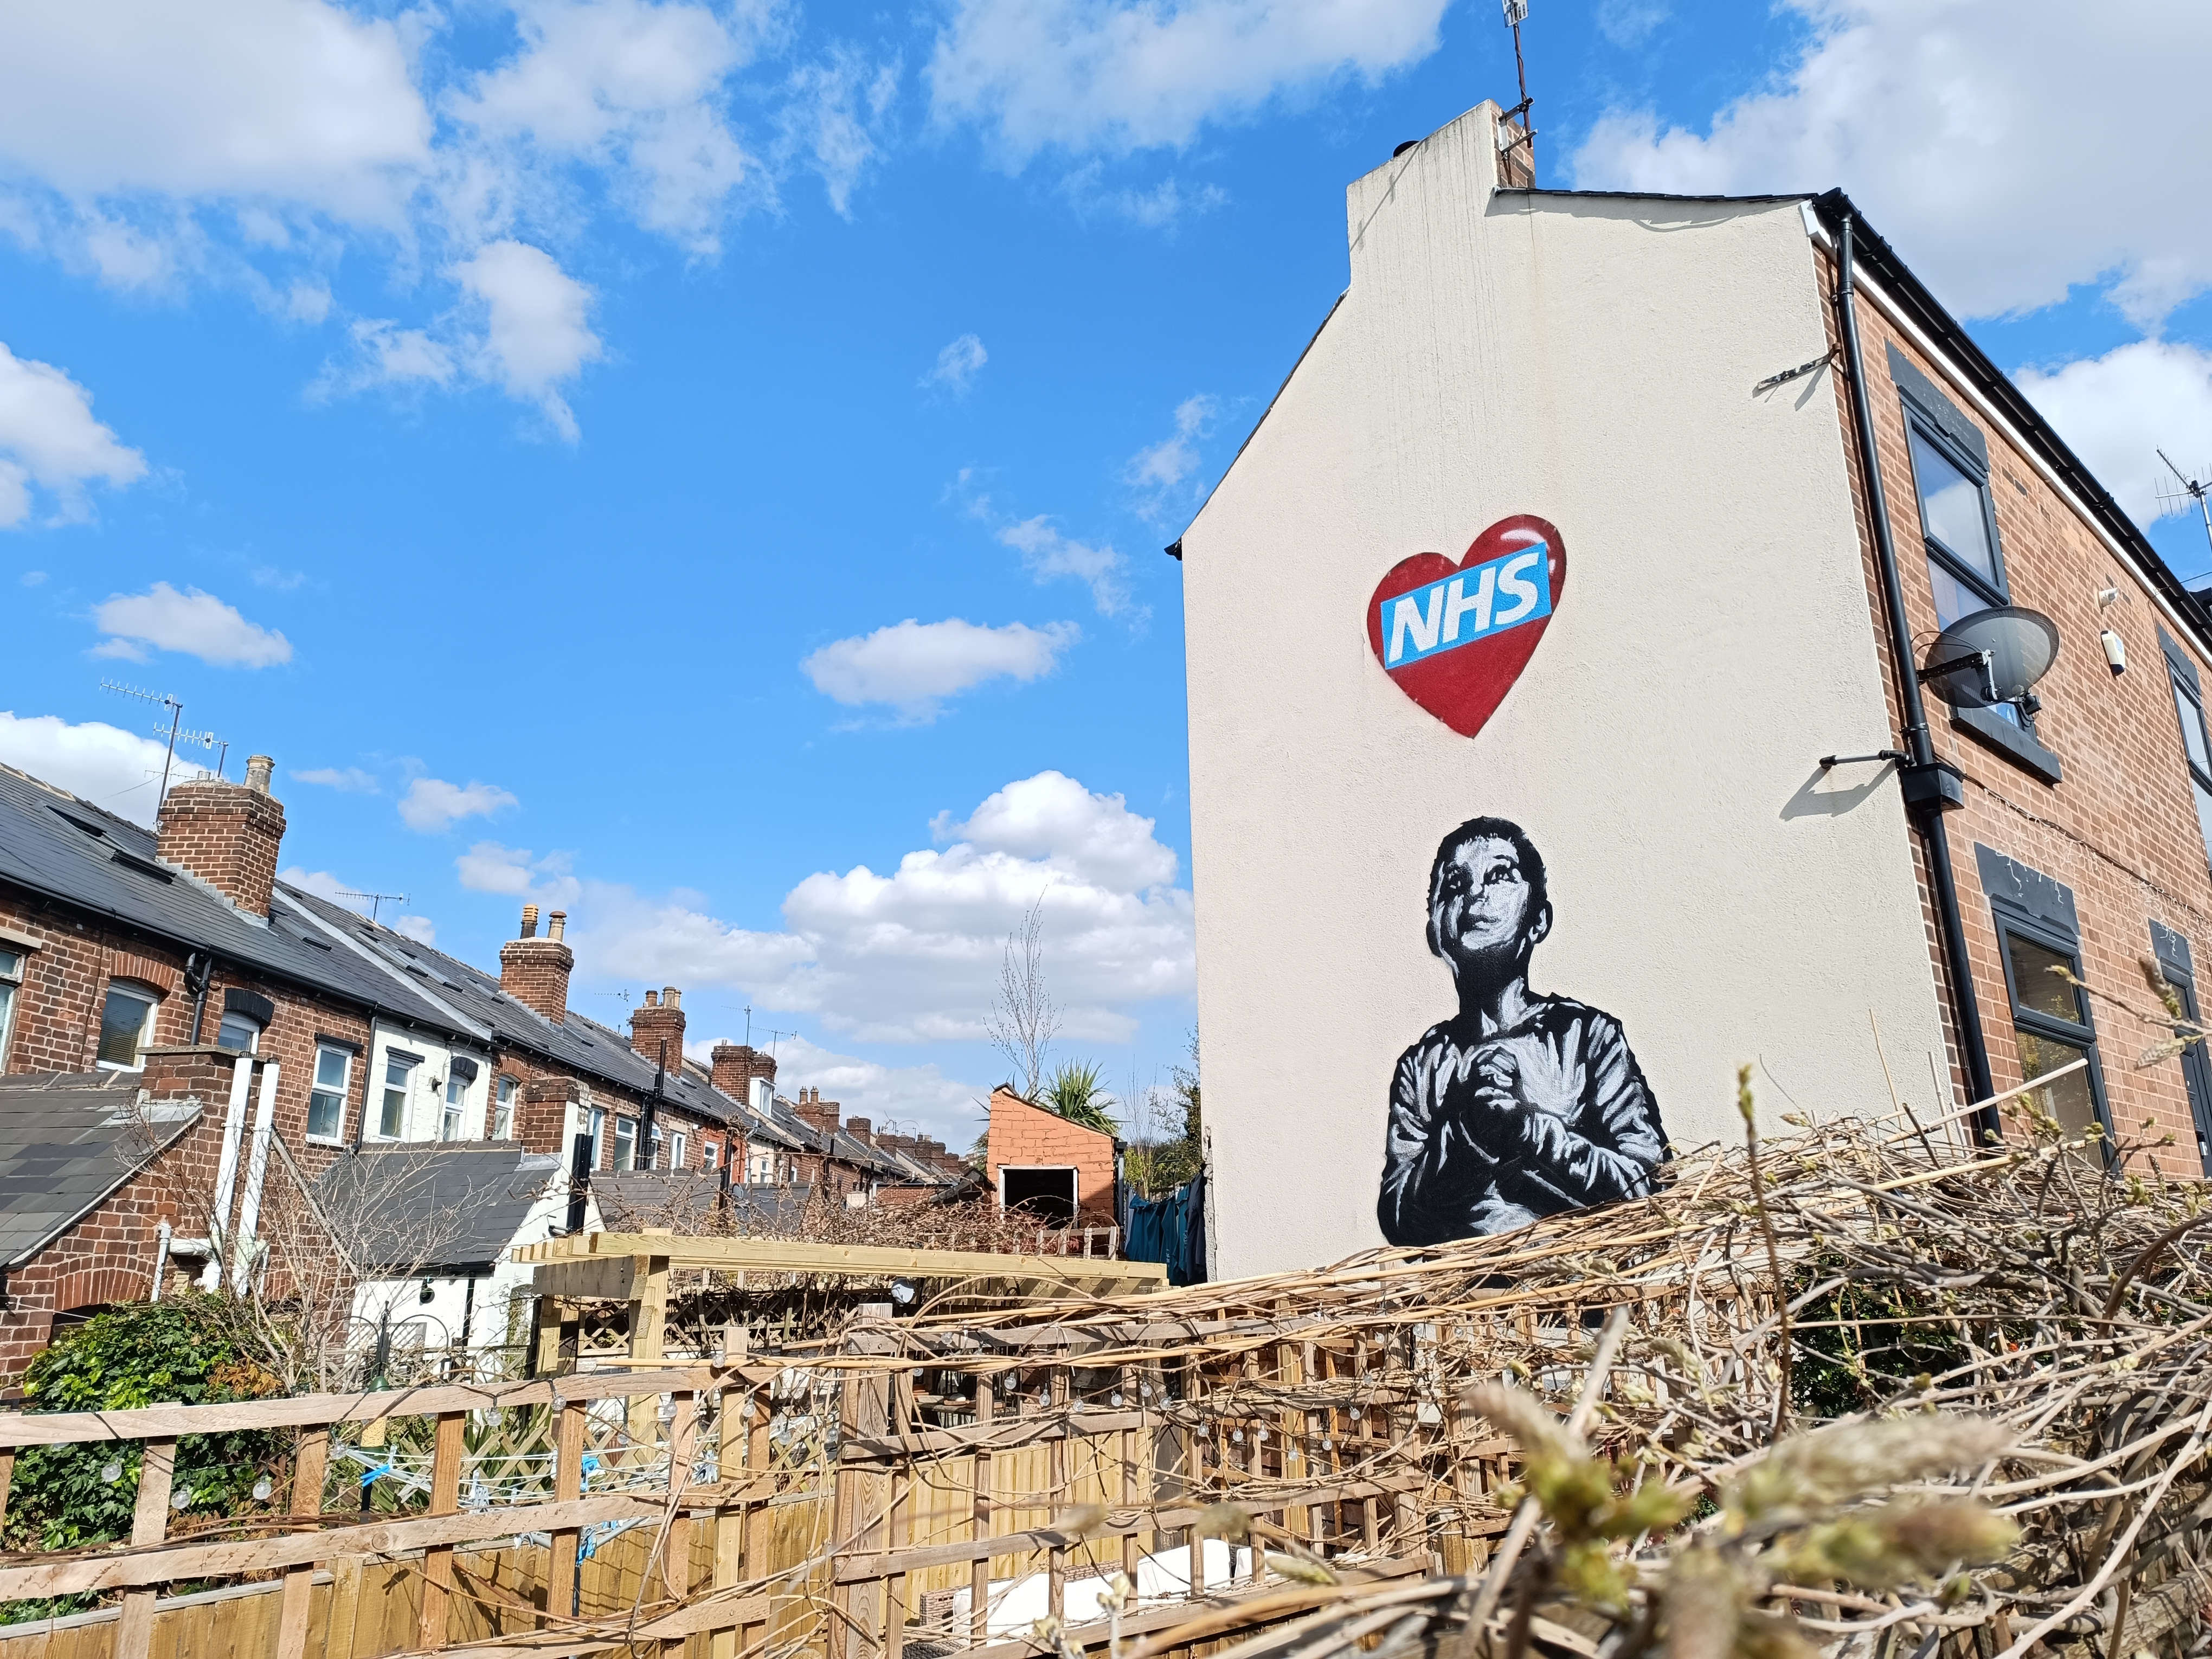 Redmi Note 12 Pro+ camera phone sample image, street art for NHS on the side of a building